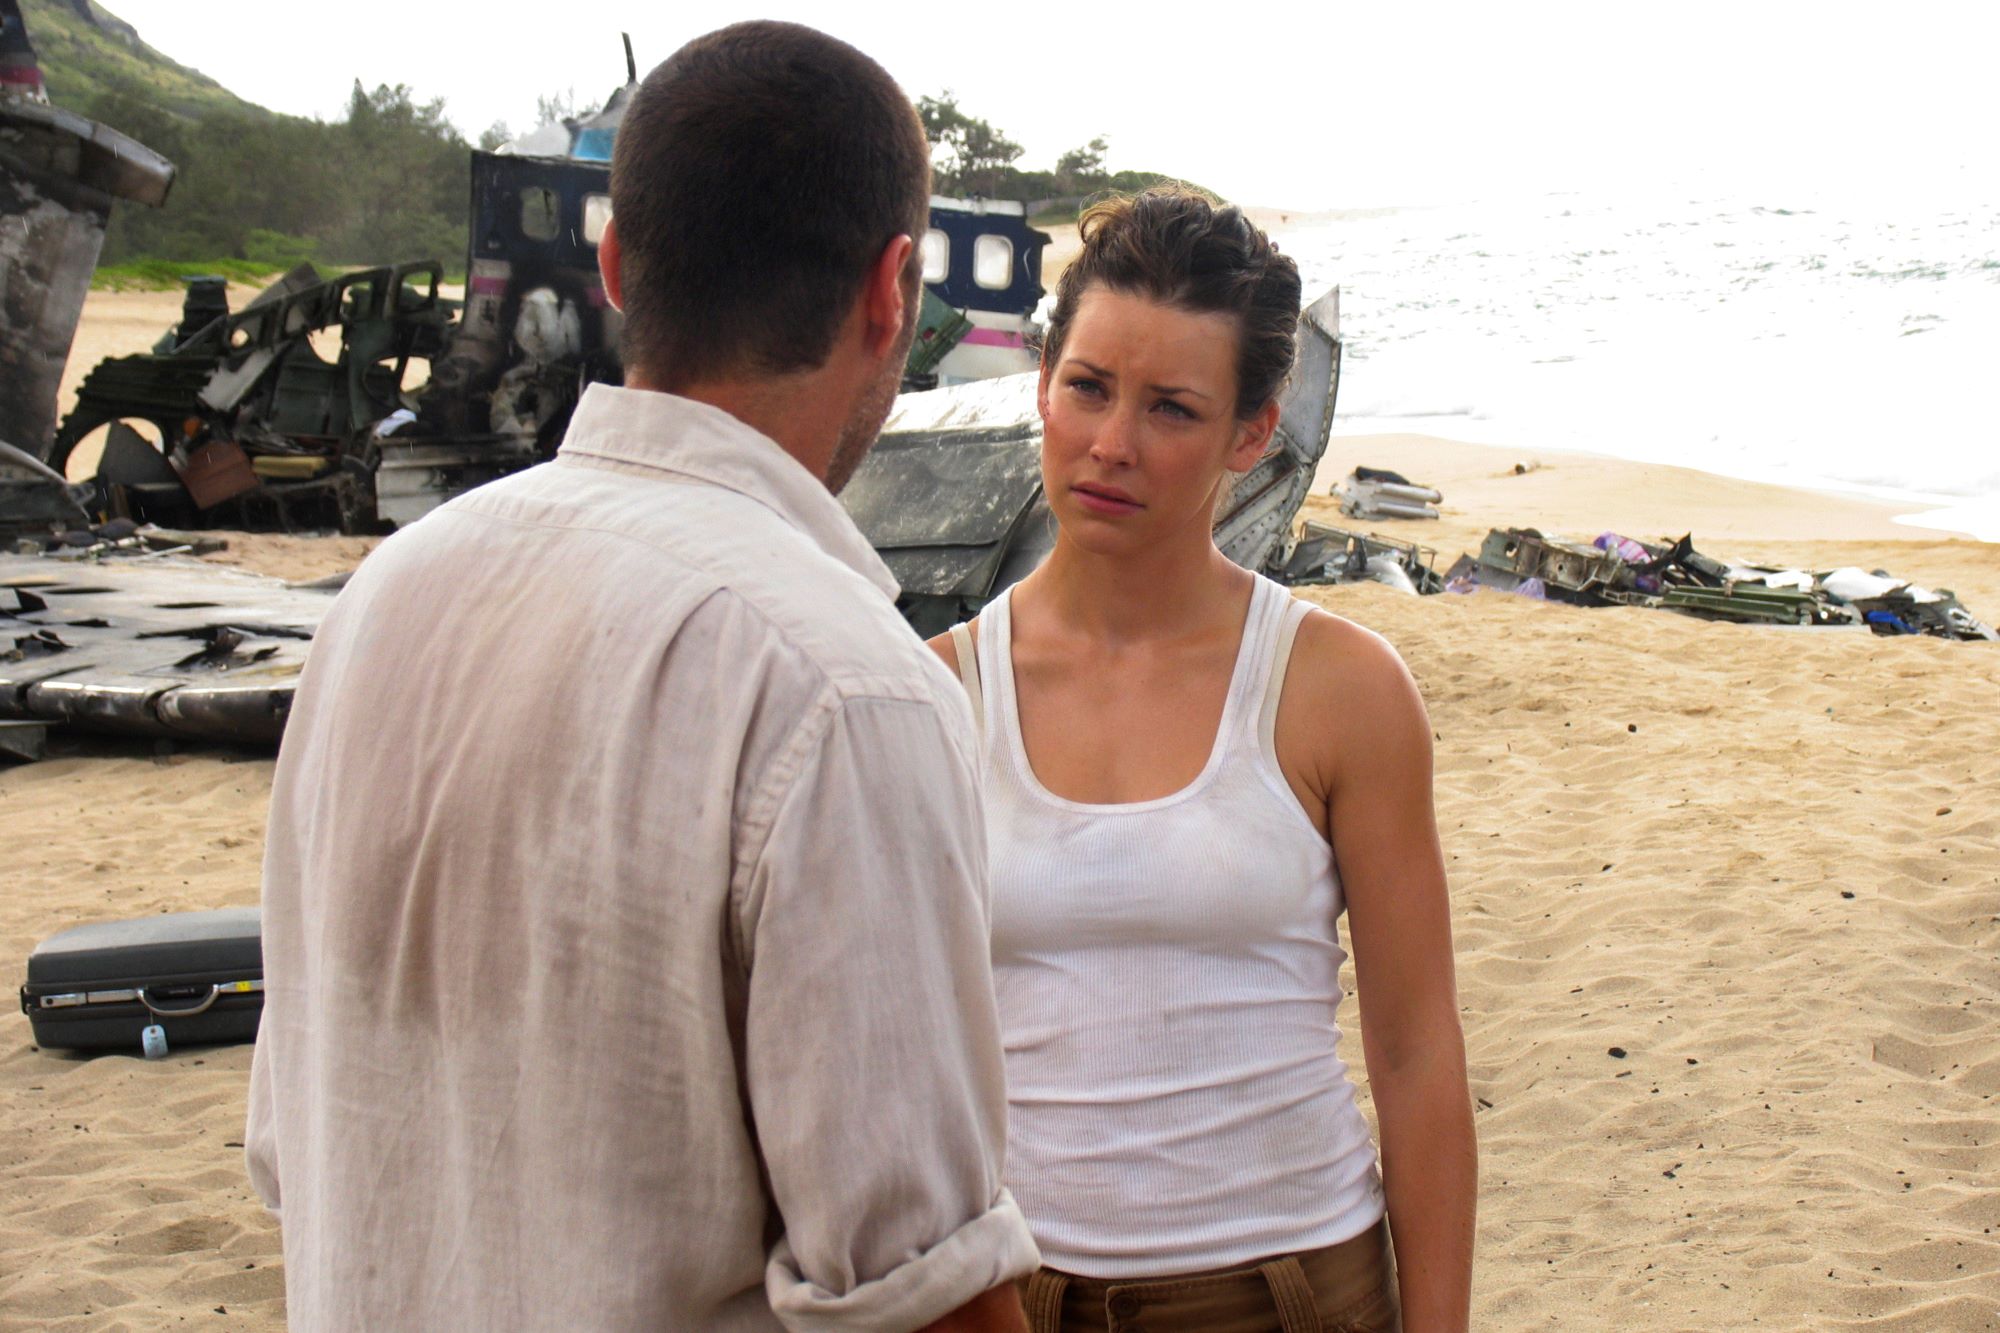 Evangeline Lilly as Kate Austen on the set of 'Lost'